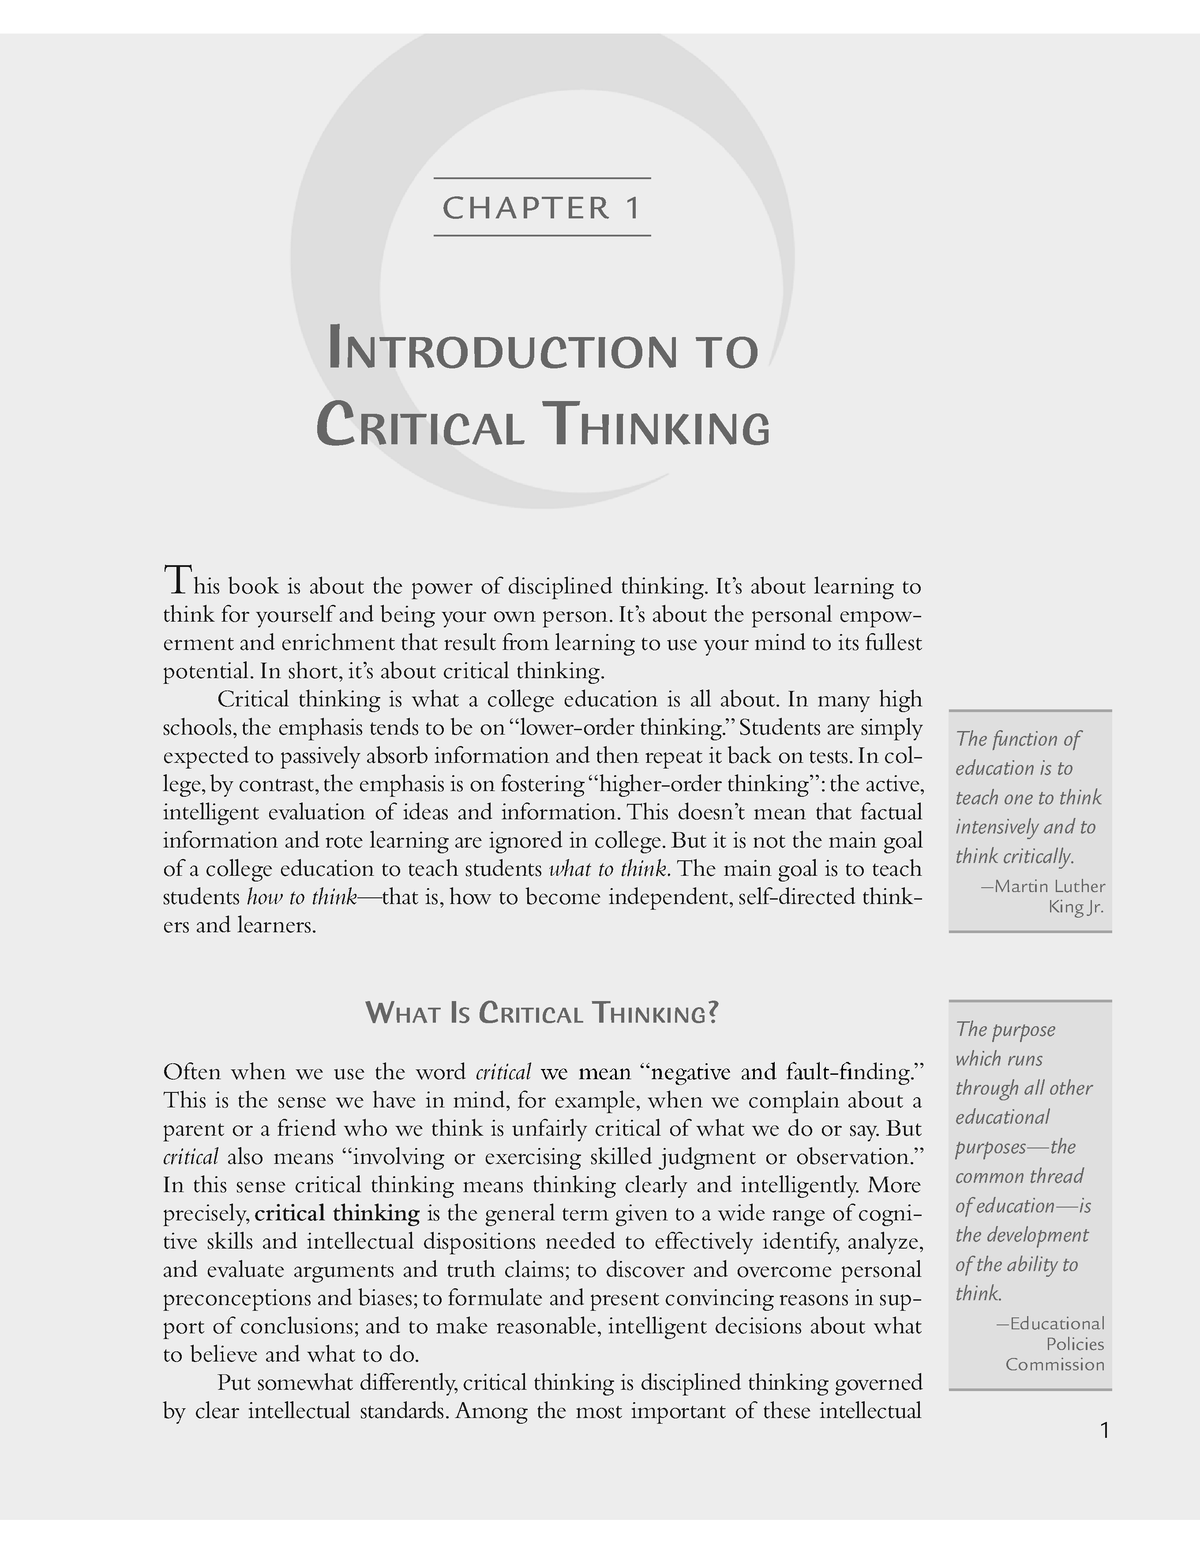 chapter 1 psychology critical thinking and science